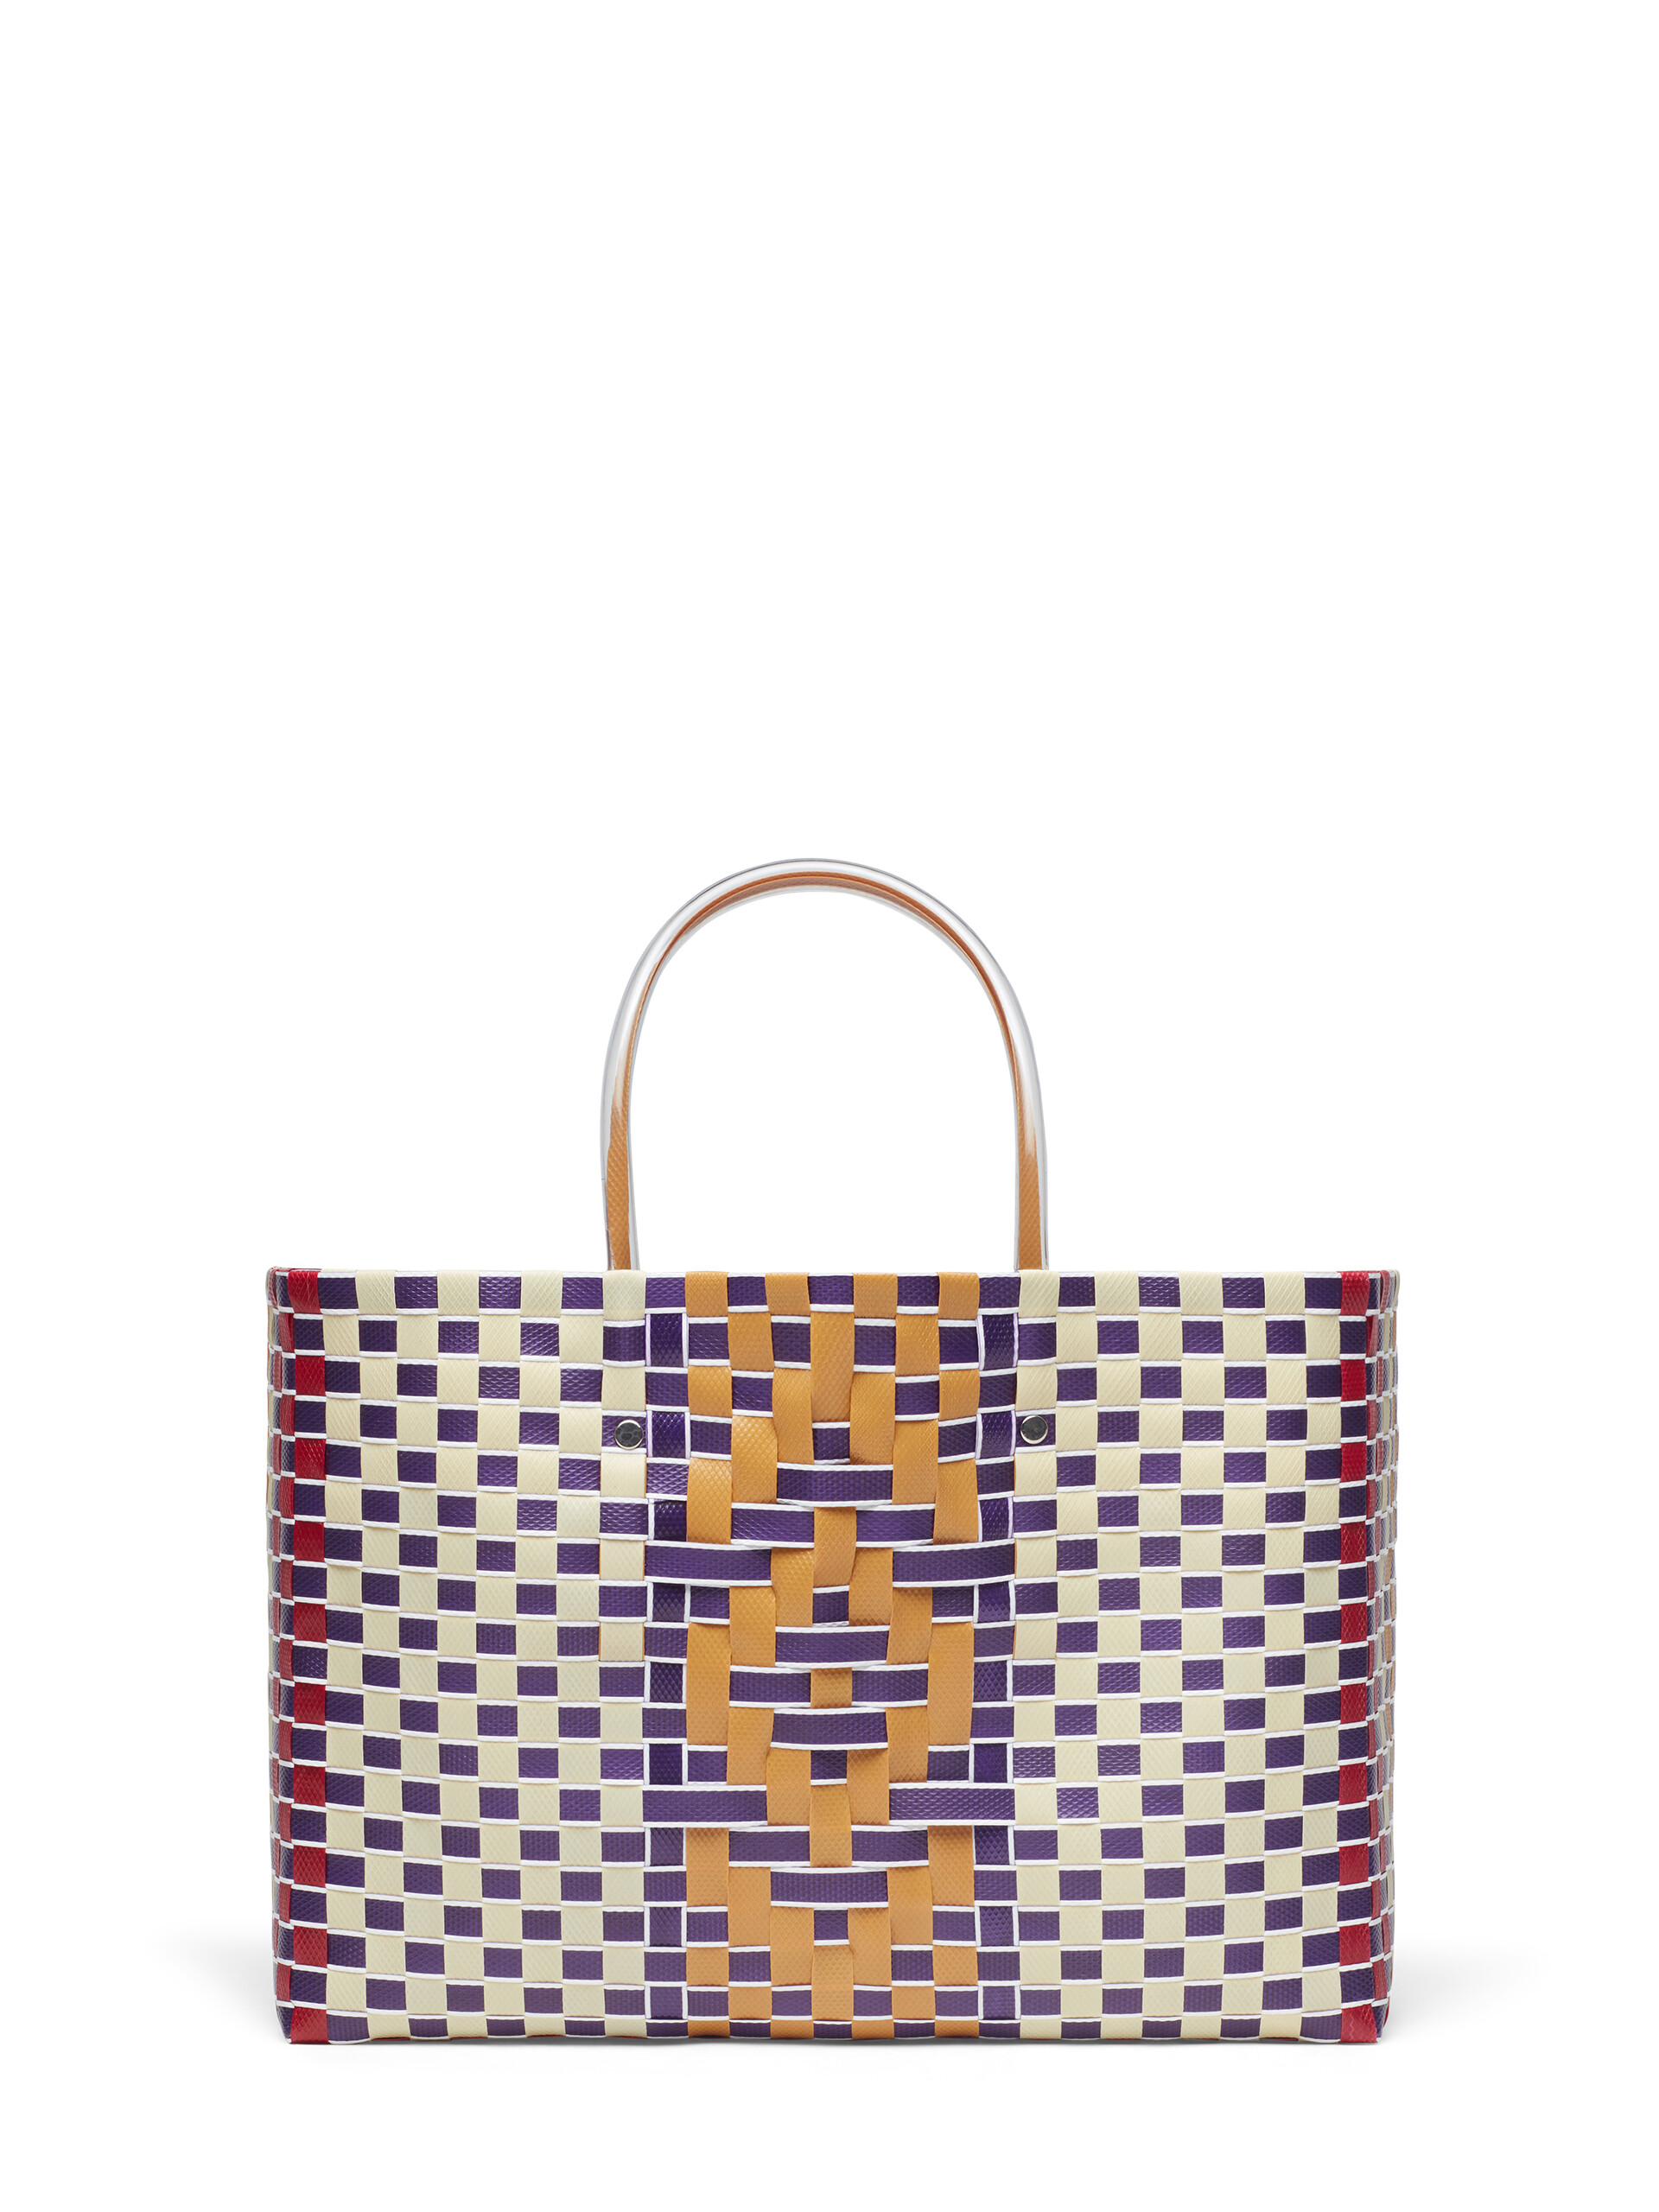 MARNI MARKET BASKET bag in multicolor blue woven material - Shopping Bags - Image 3